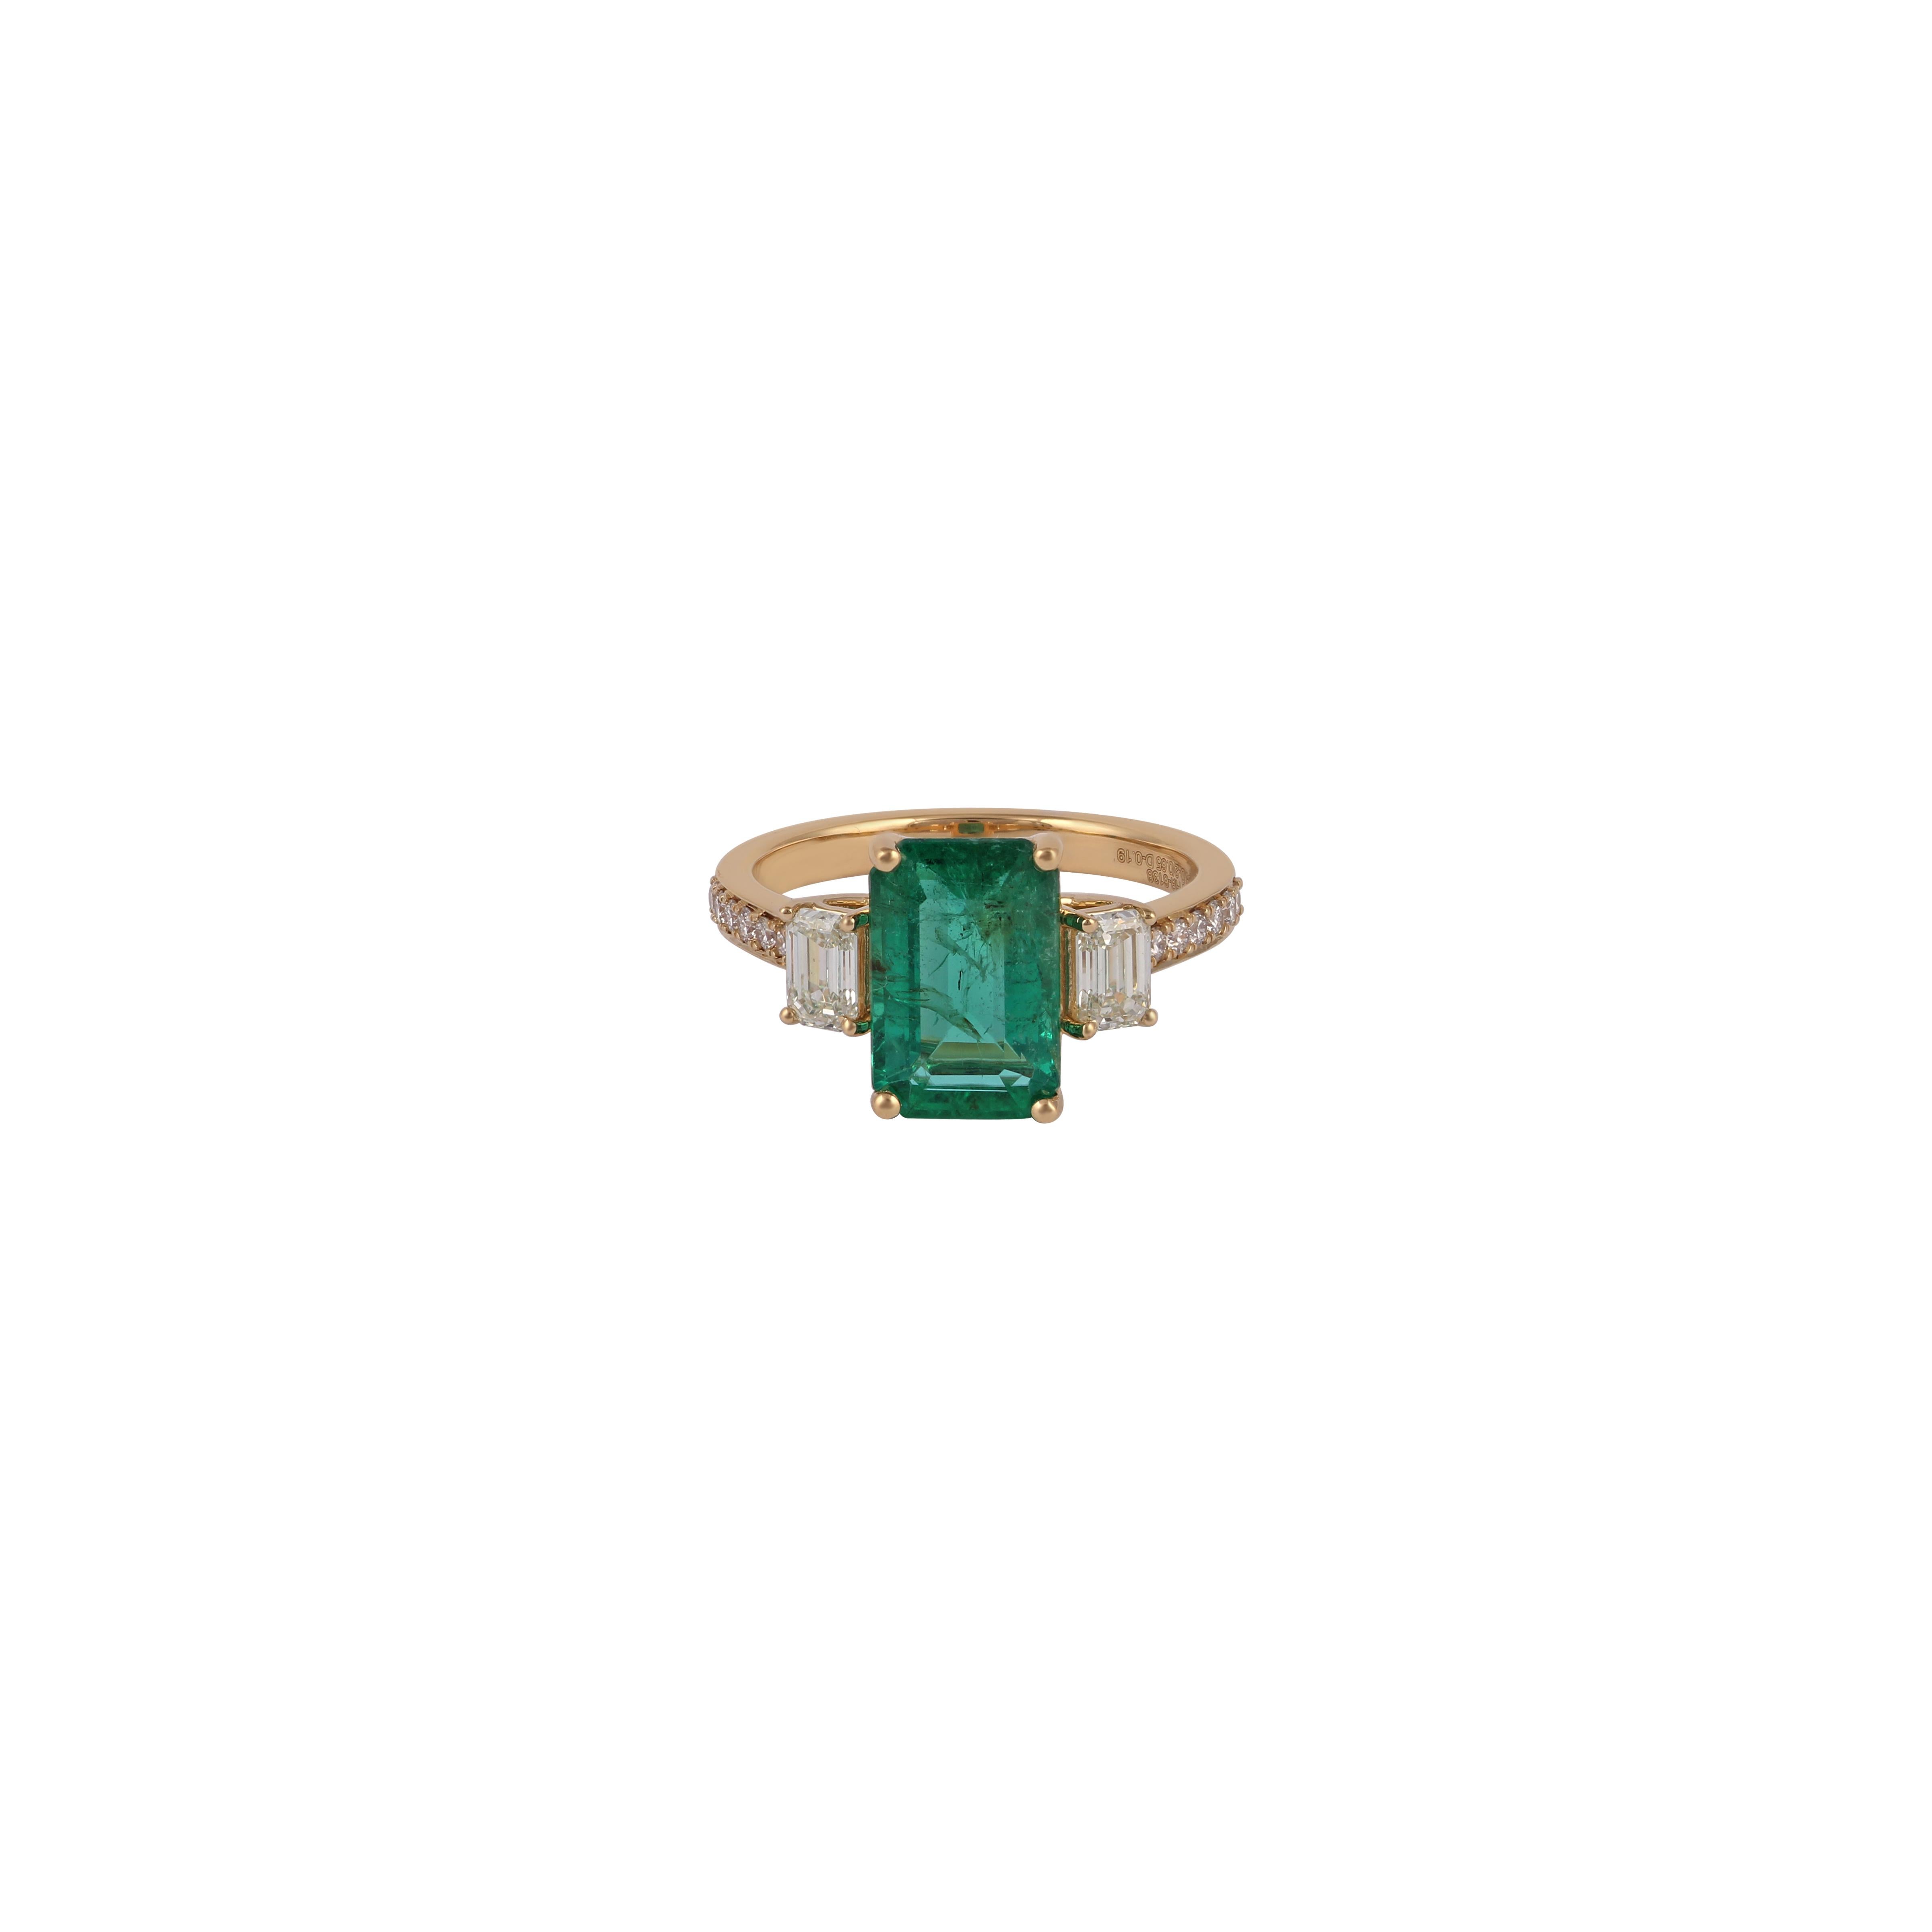 Its an exclusive emerald & diamond ring studded in 18k yellow gold with 1 piece of octagon shaped emerald weight 2.85 carat with 2 pieces of emerald cut diamonds weight 0.65 carat & 14 pieces of round shaped diamonds weight 0.19 carat this entire